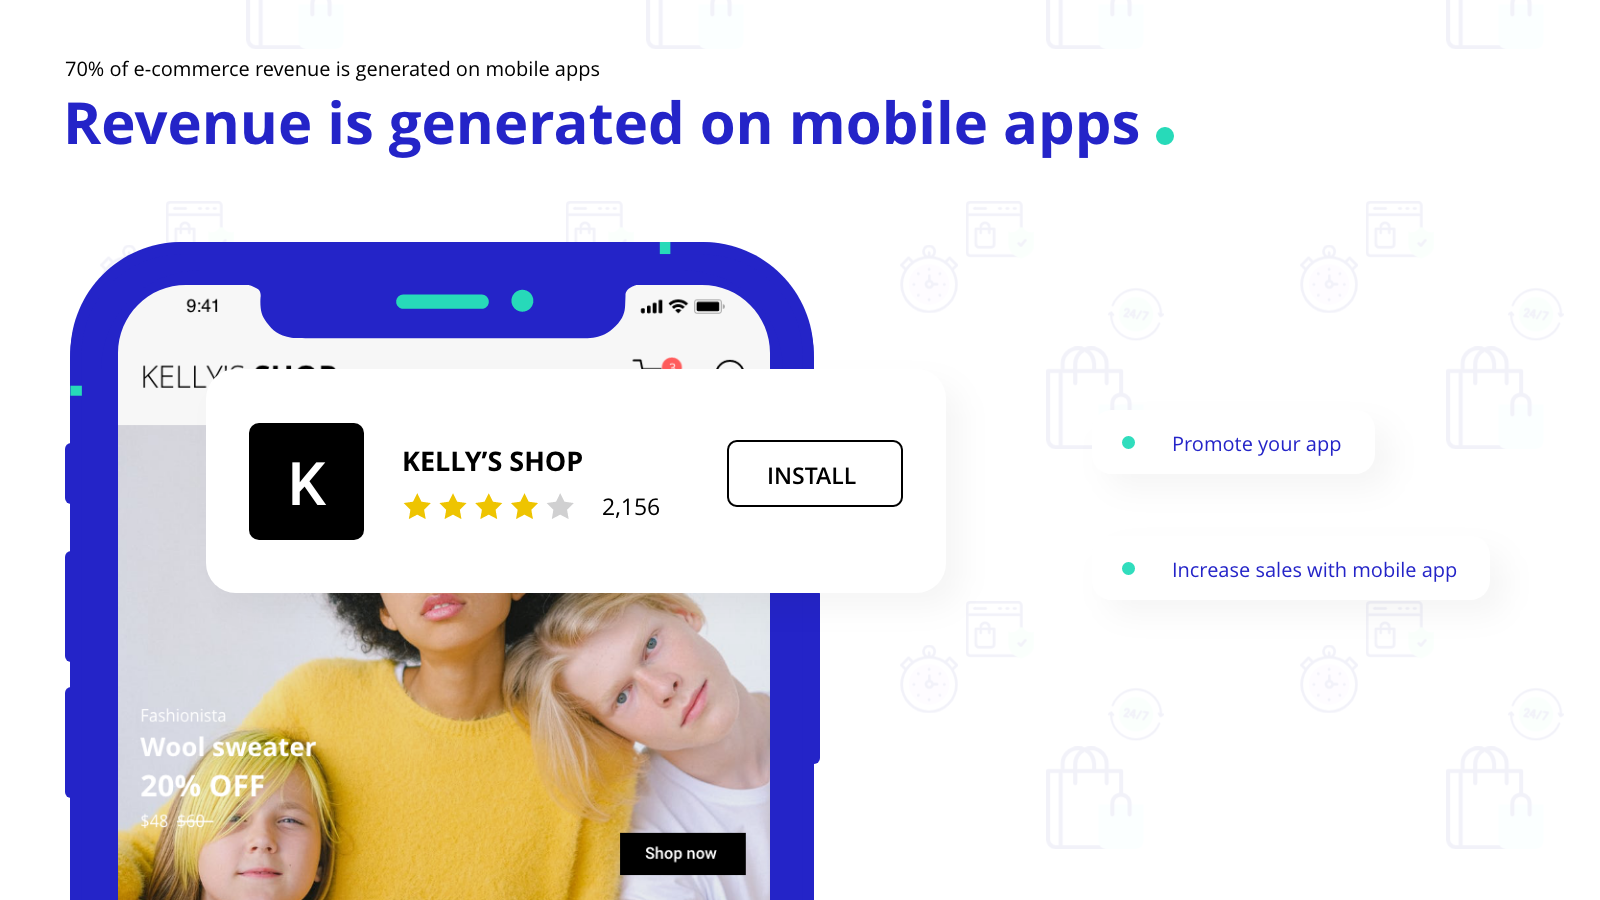 Revenue is generated on mobile apps